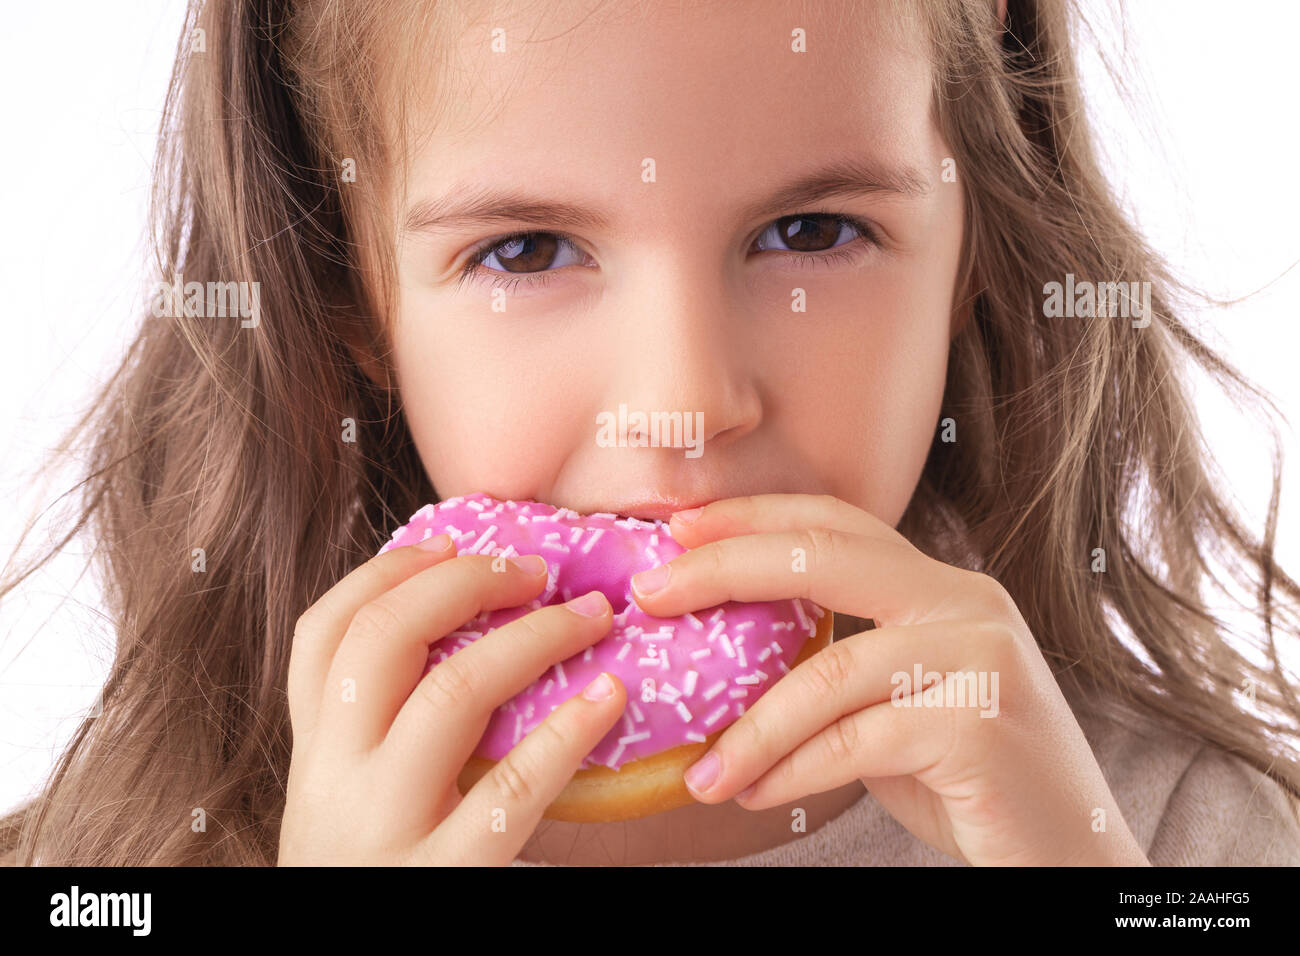 Happy little girl eating pink donut Stock Photo